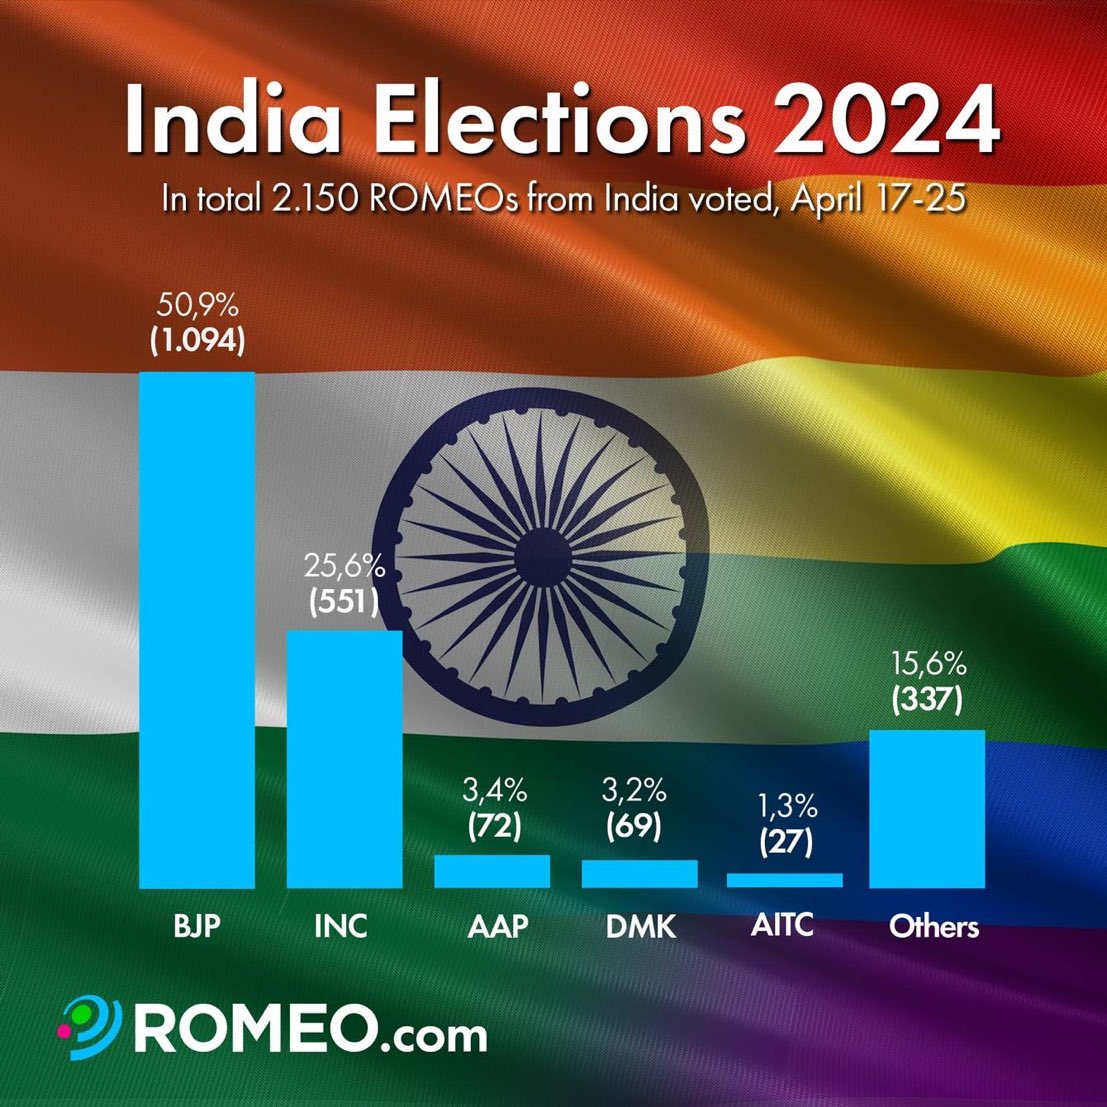 🏳️‍🌈 🇮🇳 A gay dating app, conducted a poll on political party preferences among LGBTQ+ users in India from Apr 17-25 🔥 The results are: BJP: 50.9% (1,094 votes), INC: 25.6% (551 votes), AAP: 3.4% (72 votes), DMK: 3.2% (69 votes), AITC: 1.3% (27 votes), Others: 15.6% (337…